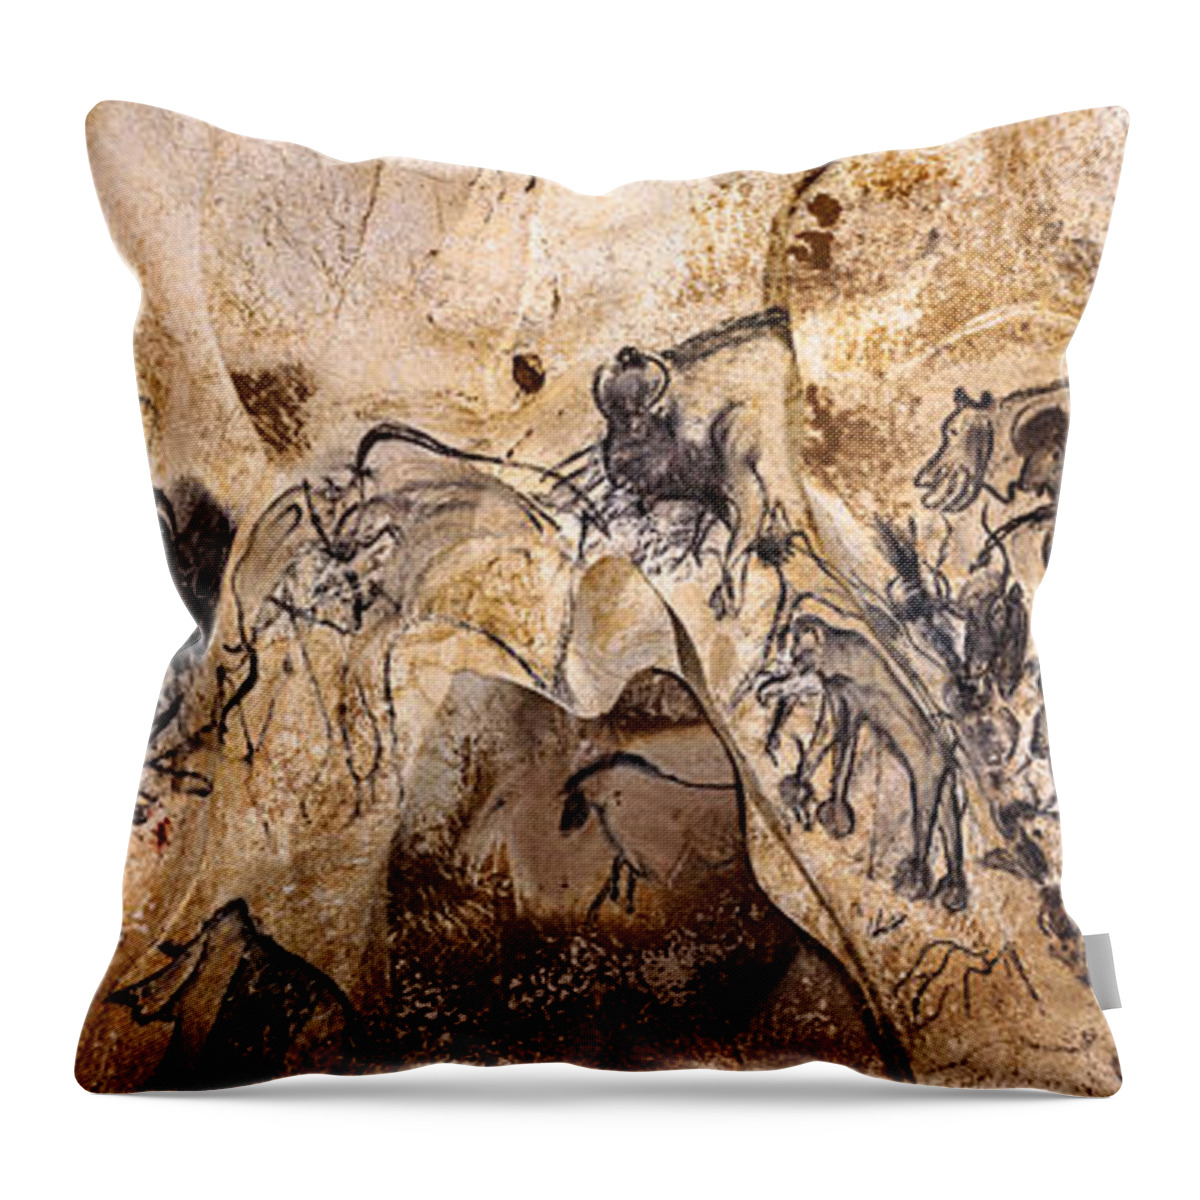 Chauvet Throw Pillow featuring the digital art Chauvet Lions and Rhinos by Weston Westmoreland